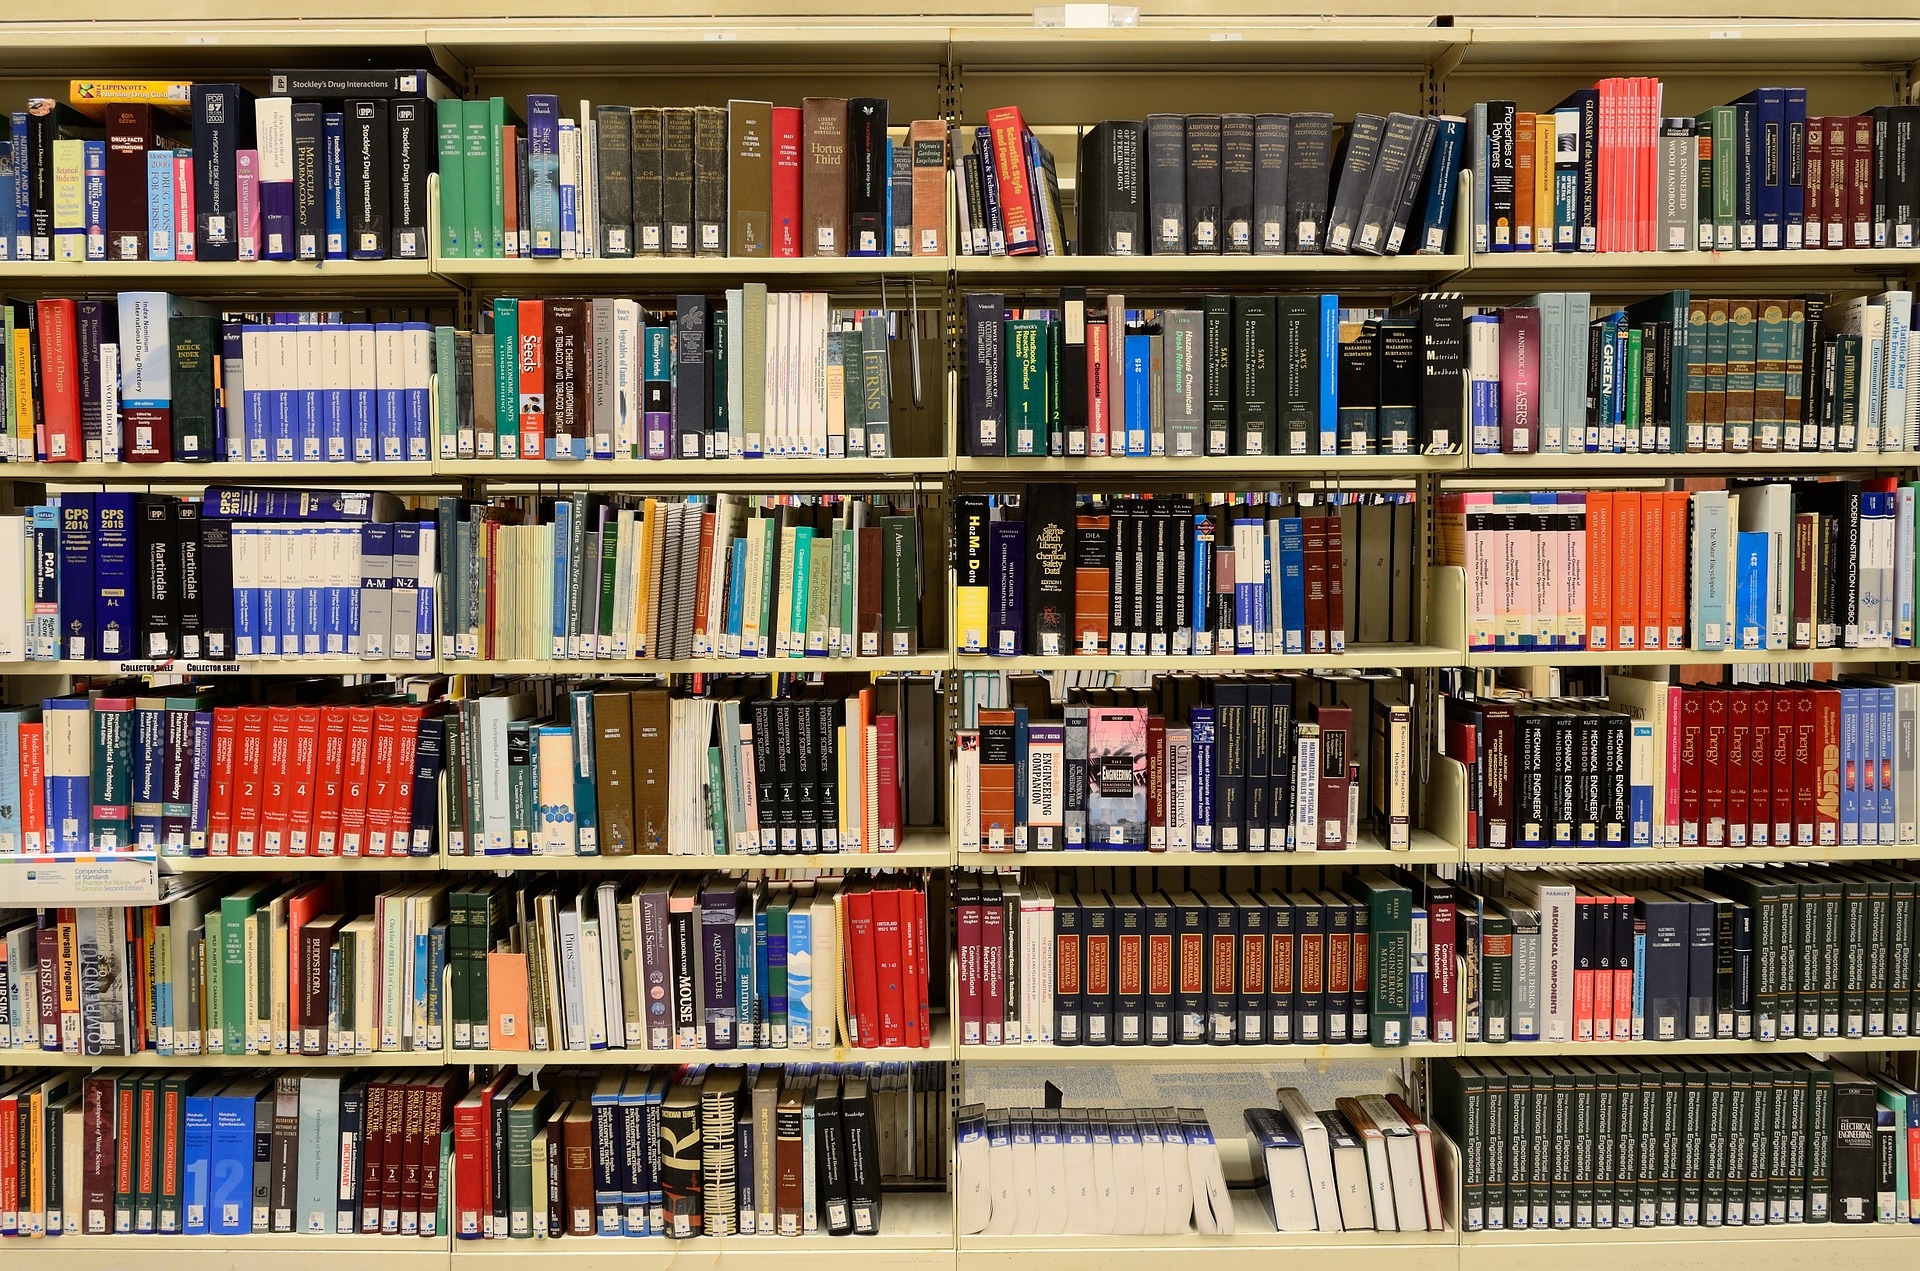 Simitless helps small libraries manage their collection and loans.